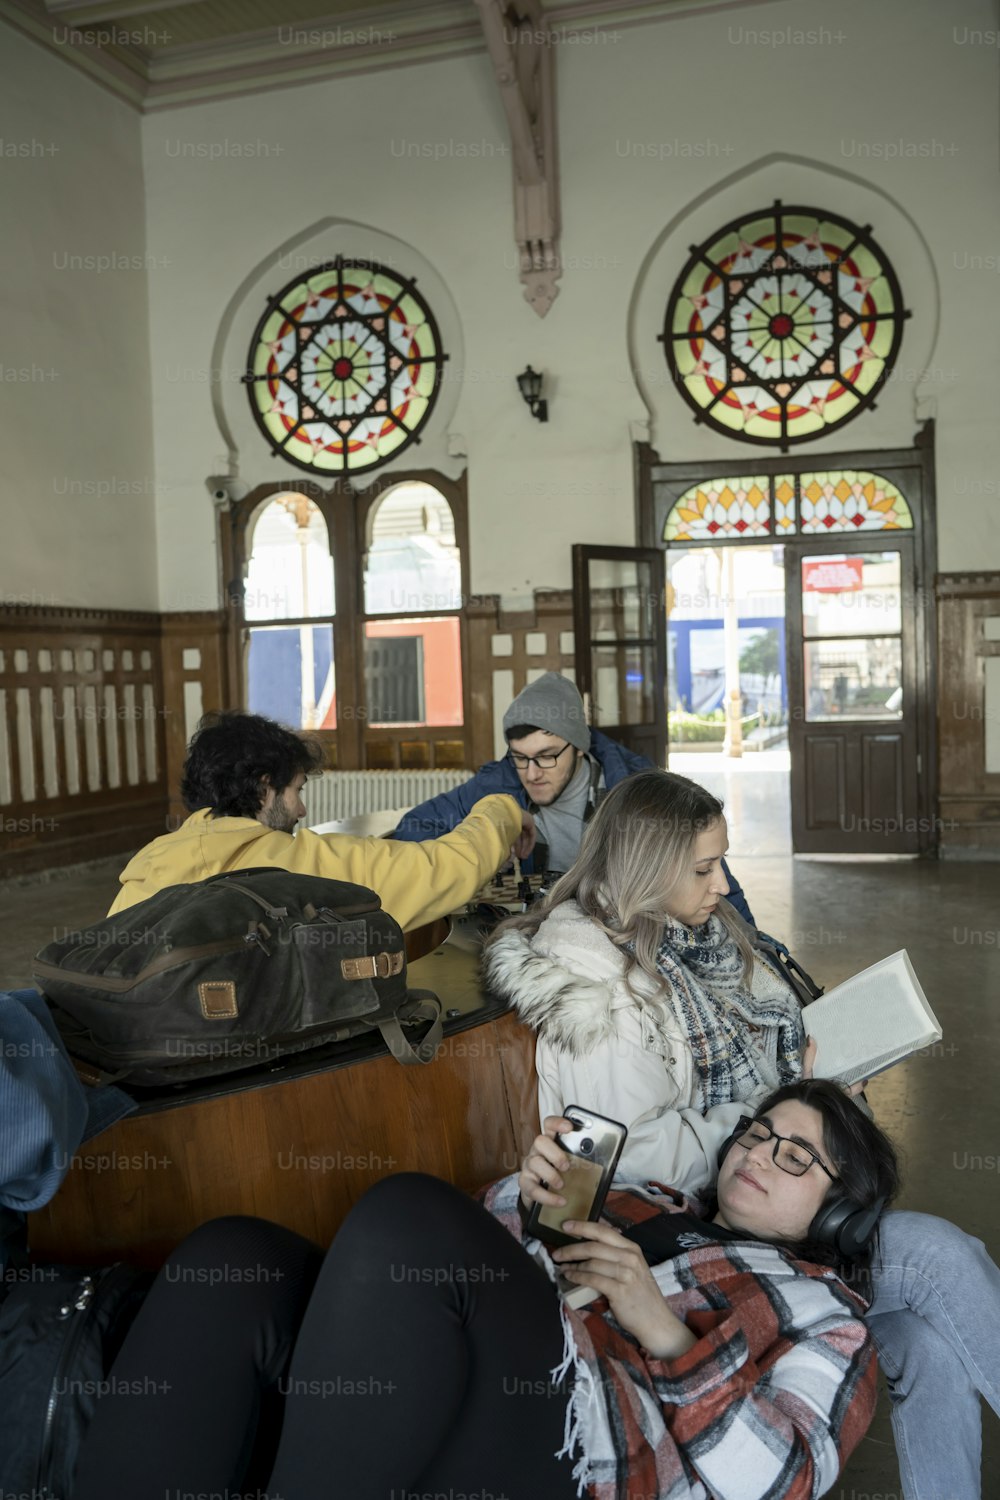 a group of people sitting on a bench in a building